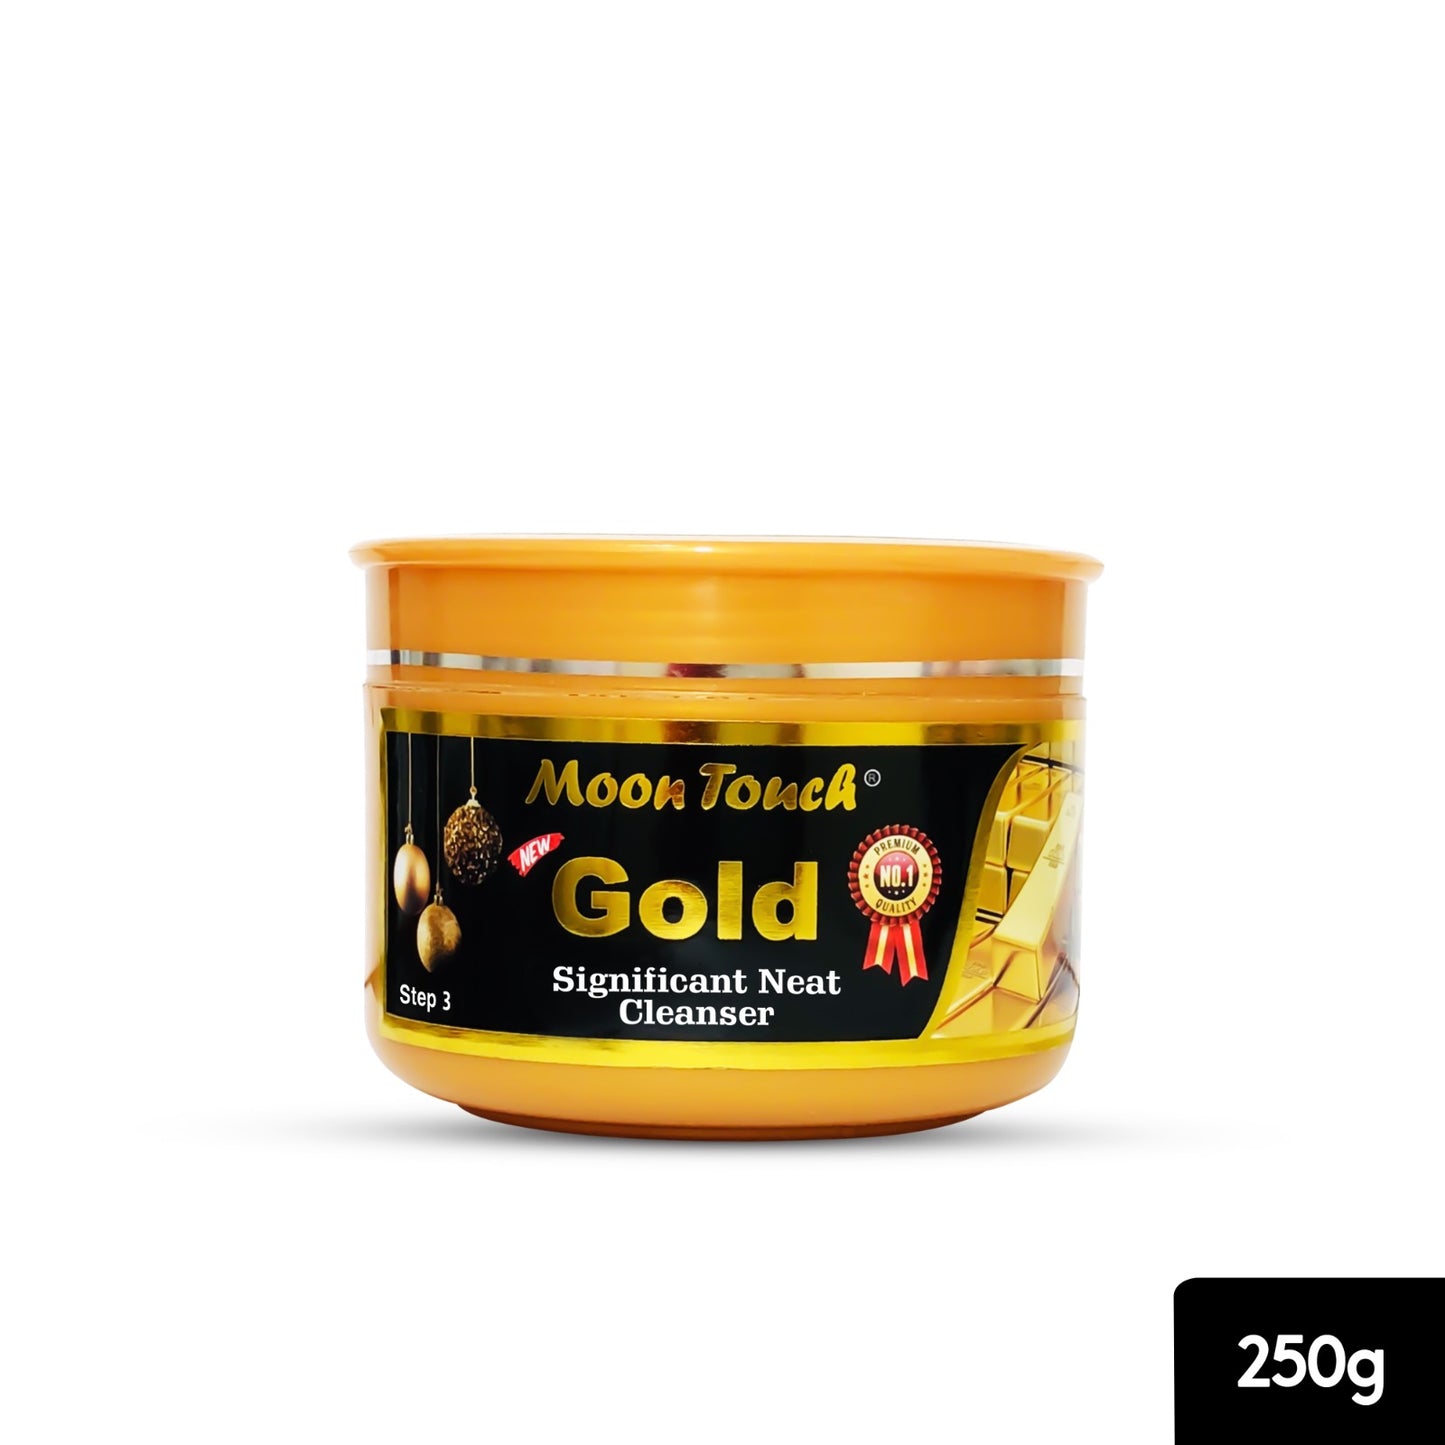 Gold Significant Neat Cleanser 250g